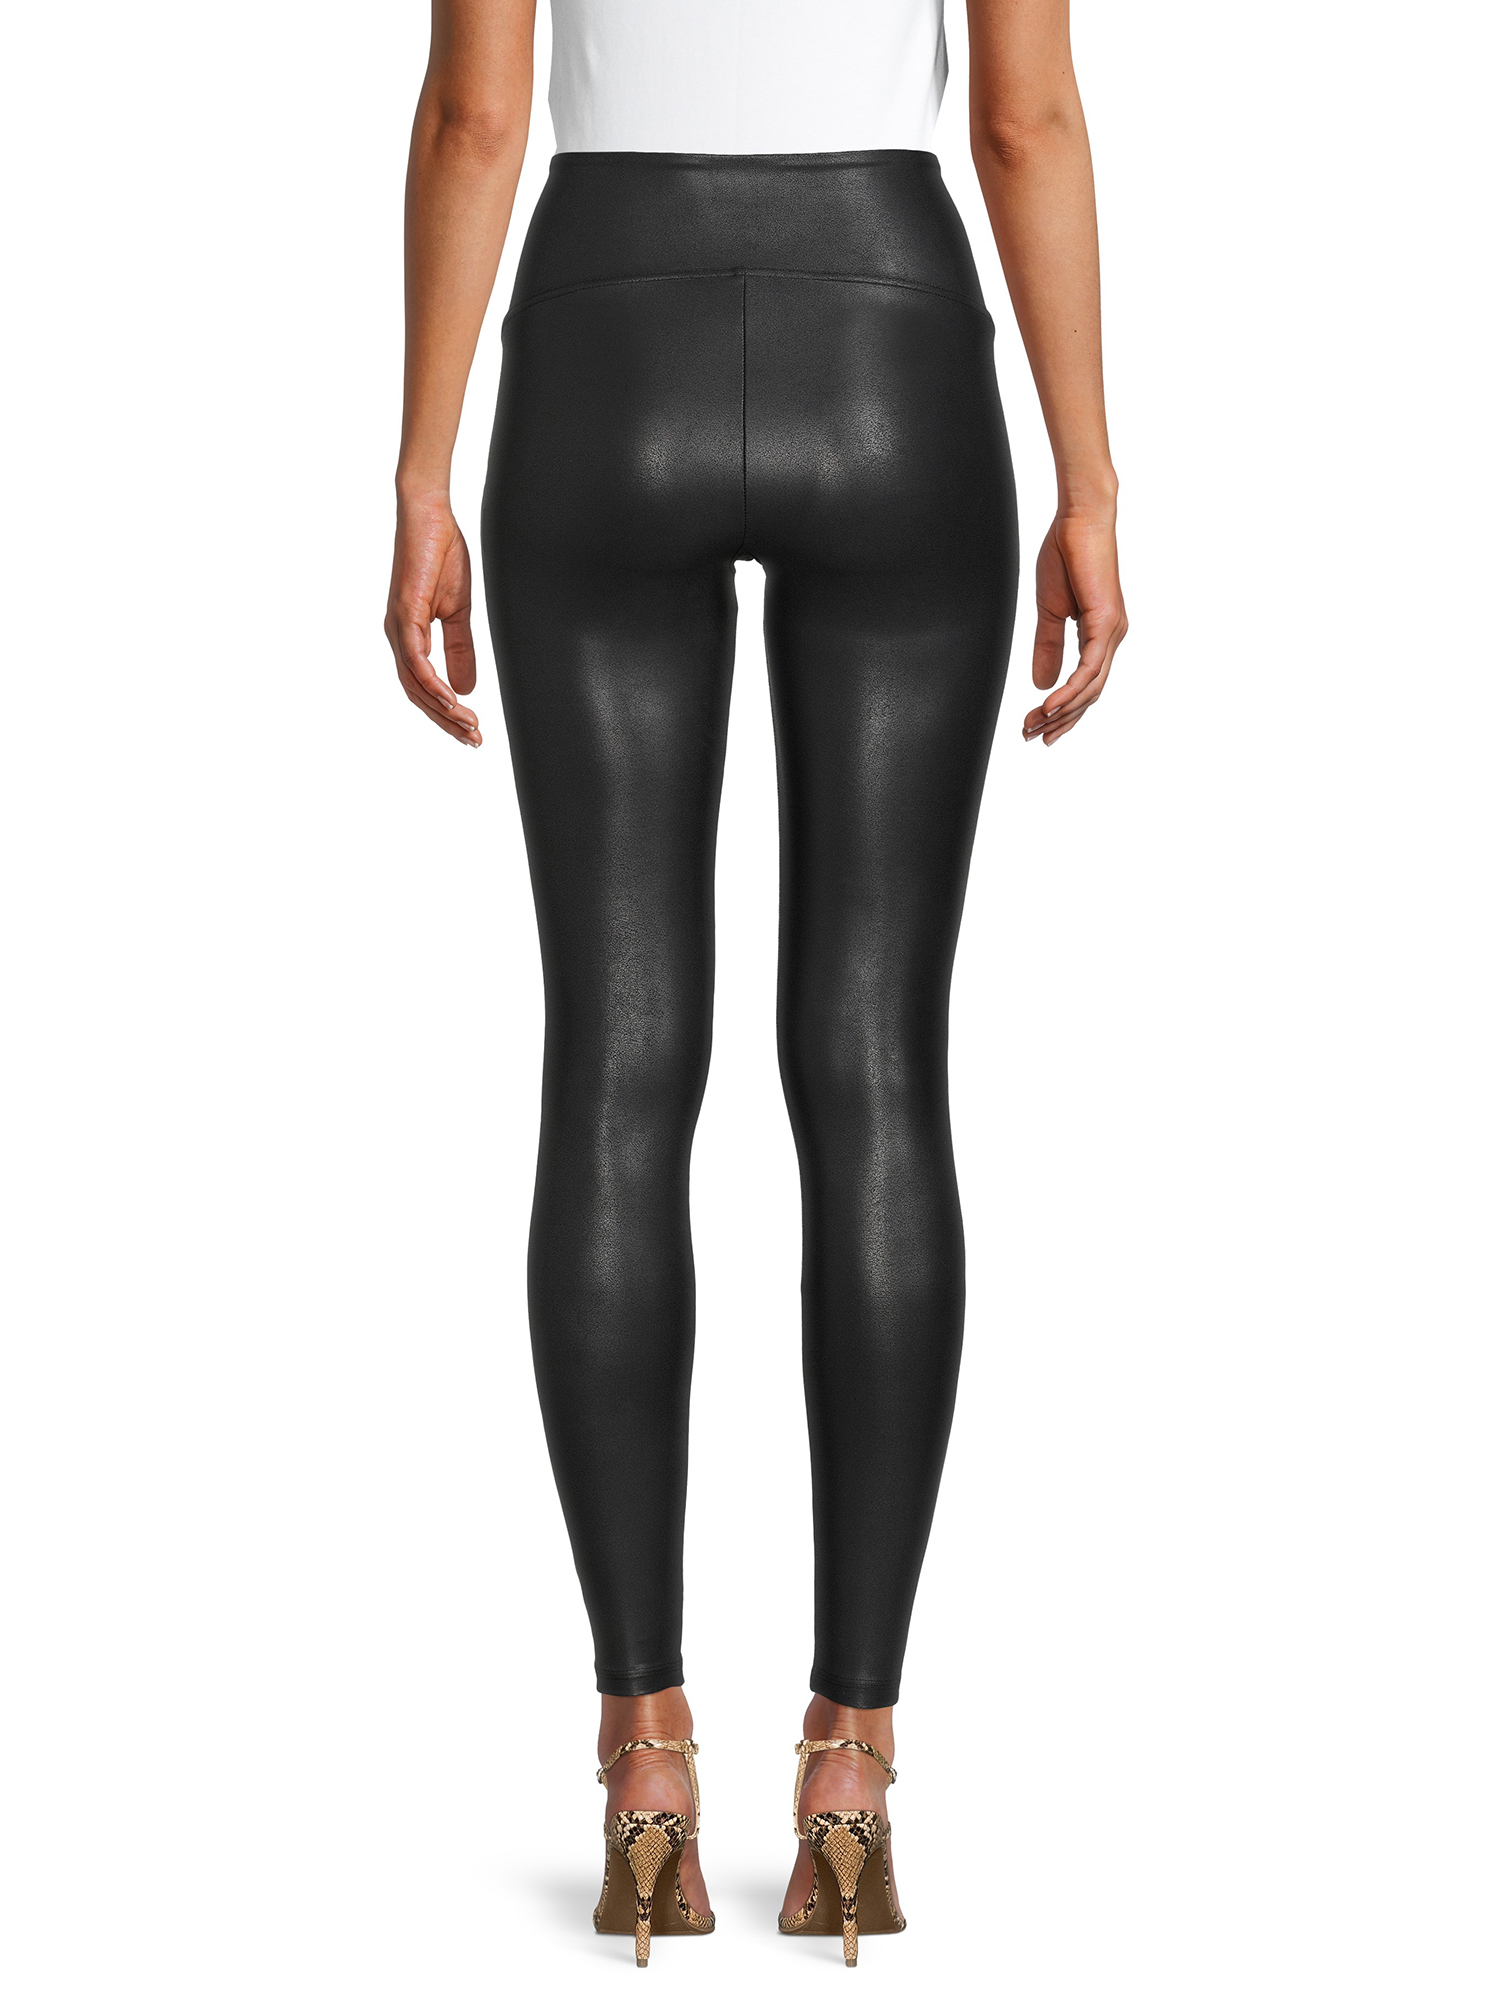 Time and Tru Women's Faux Leather Leggings, Sizes S-3XL - image 3 of 10